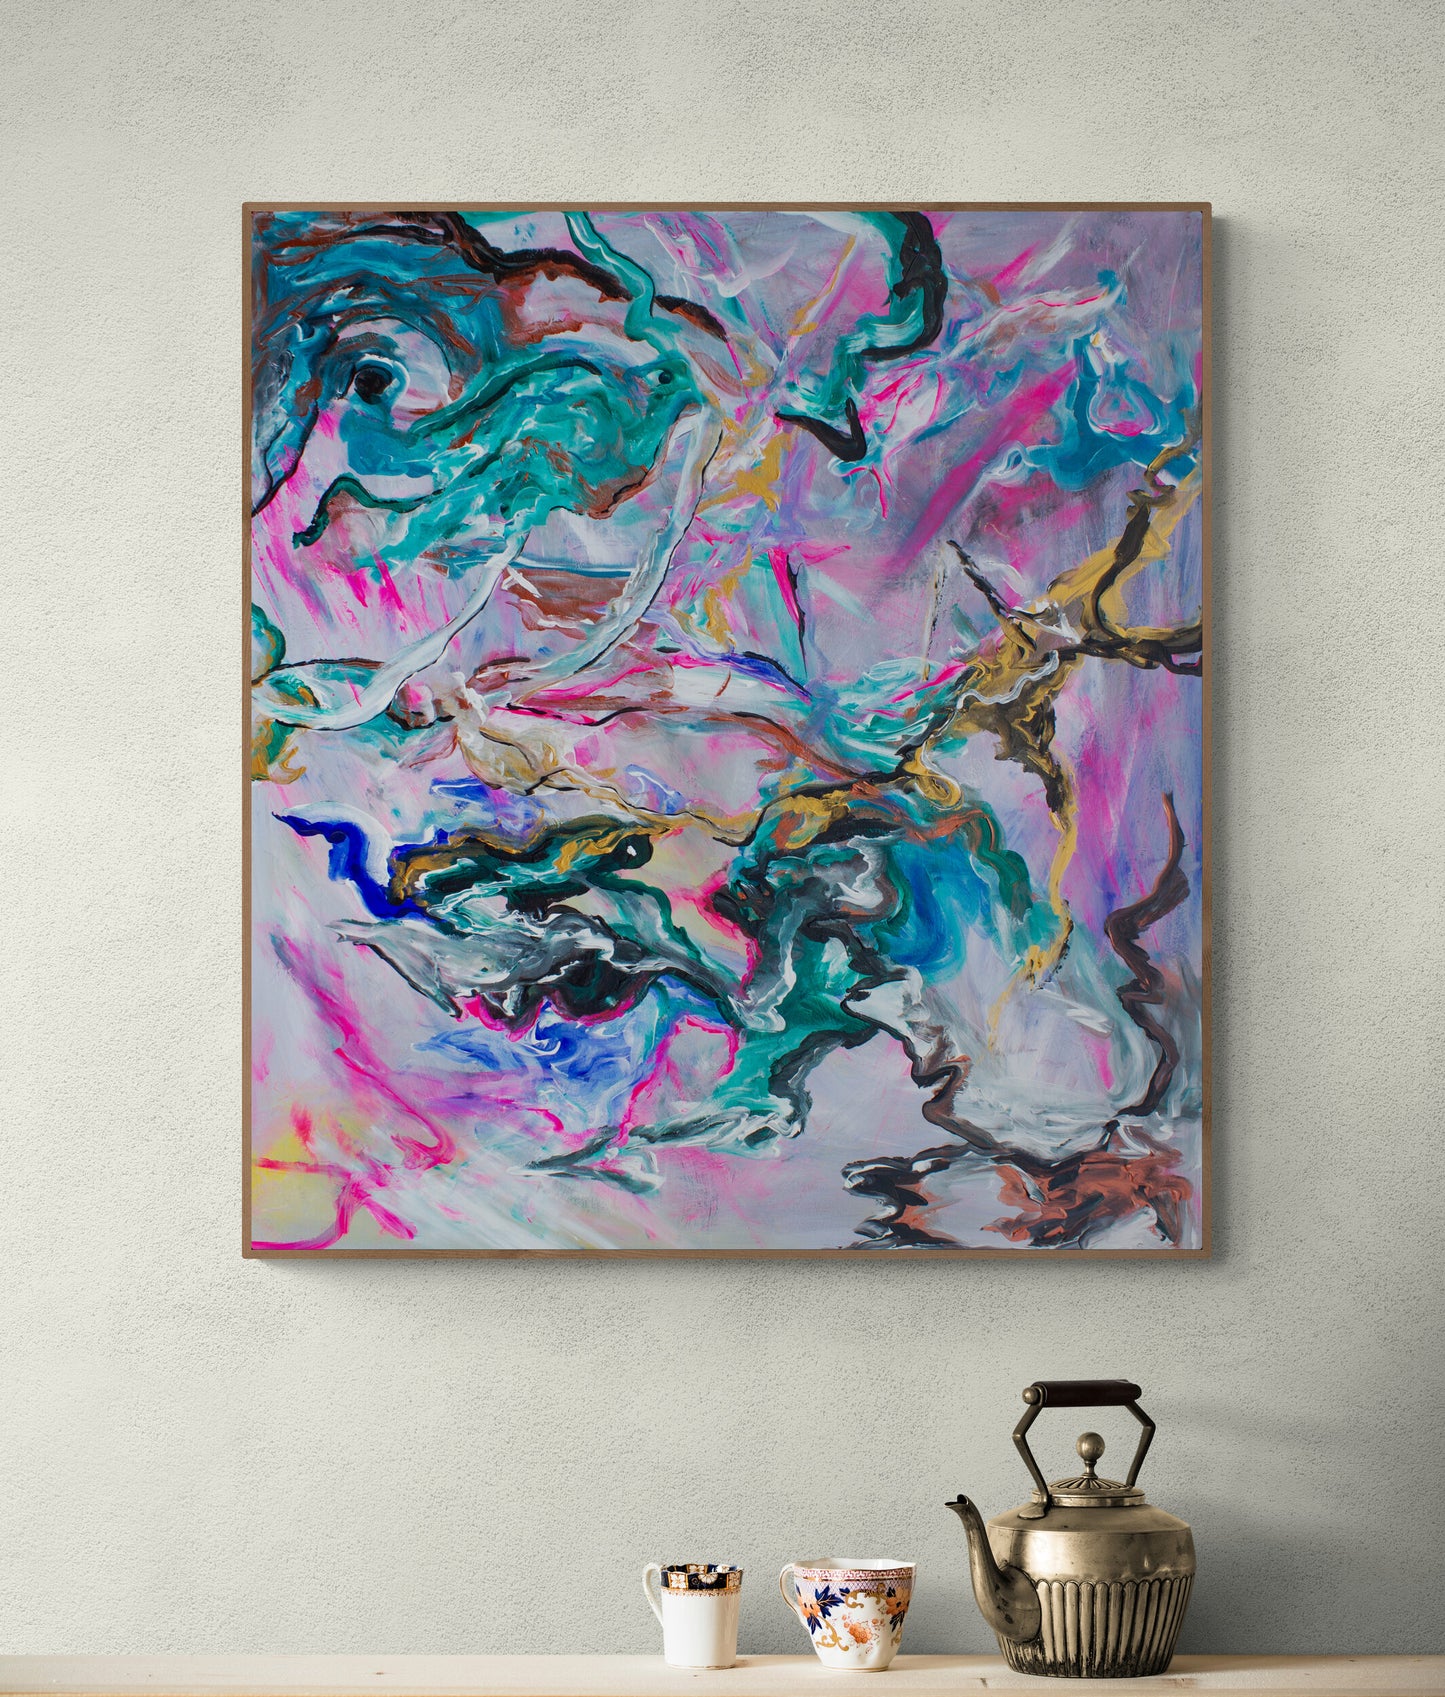 CANVAS PRINT abstract  " Explotion of the soul" with artistic finish wall art Scandinavian style